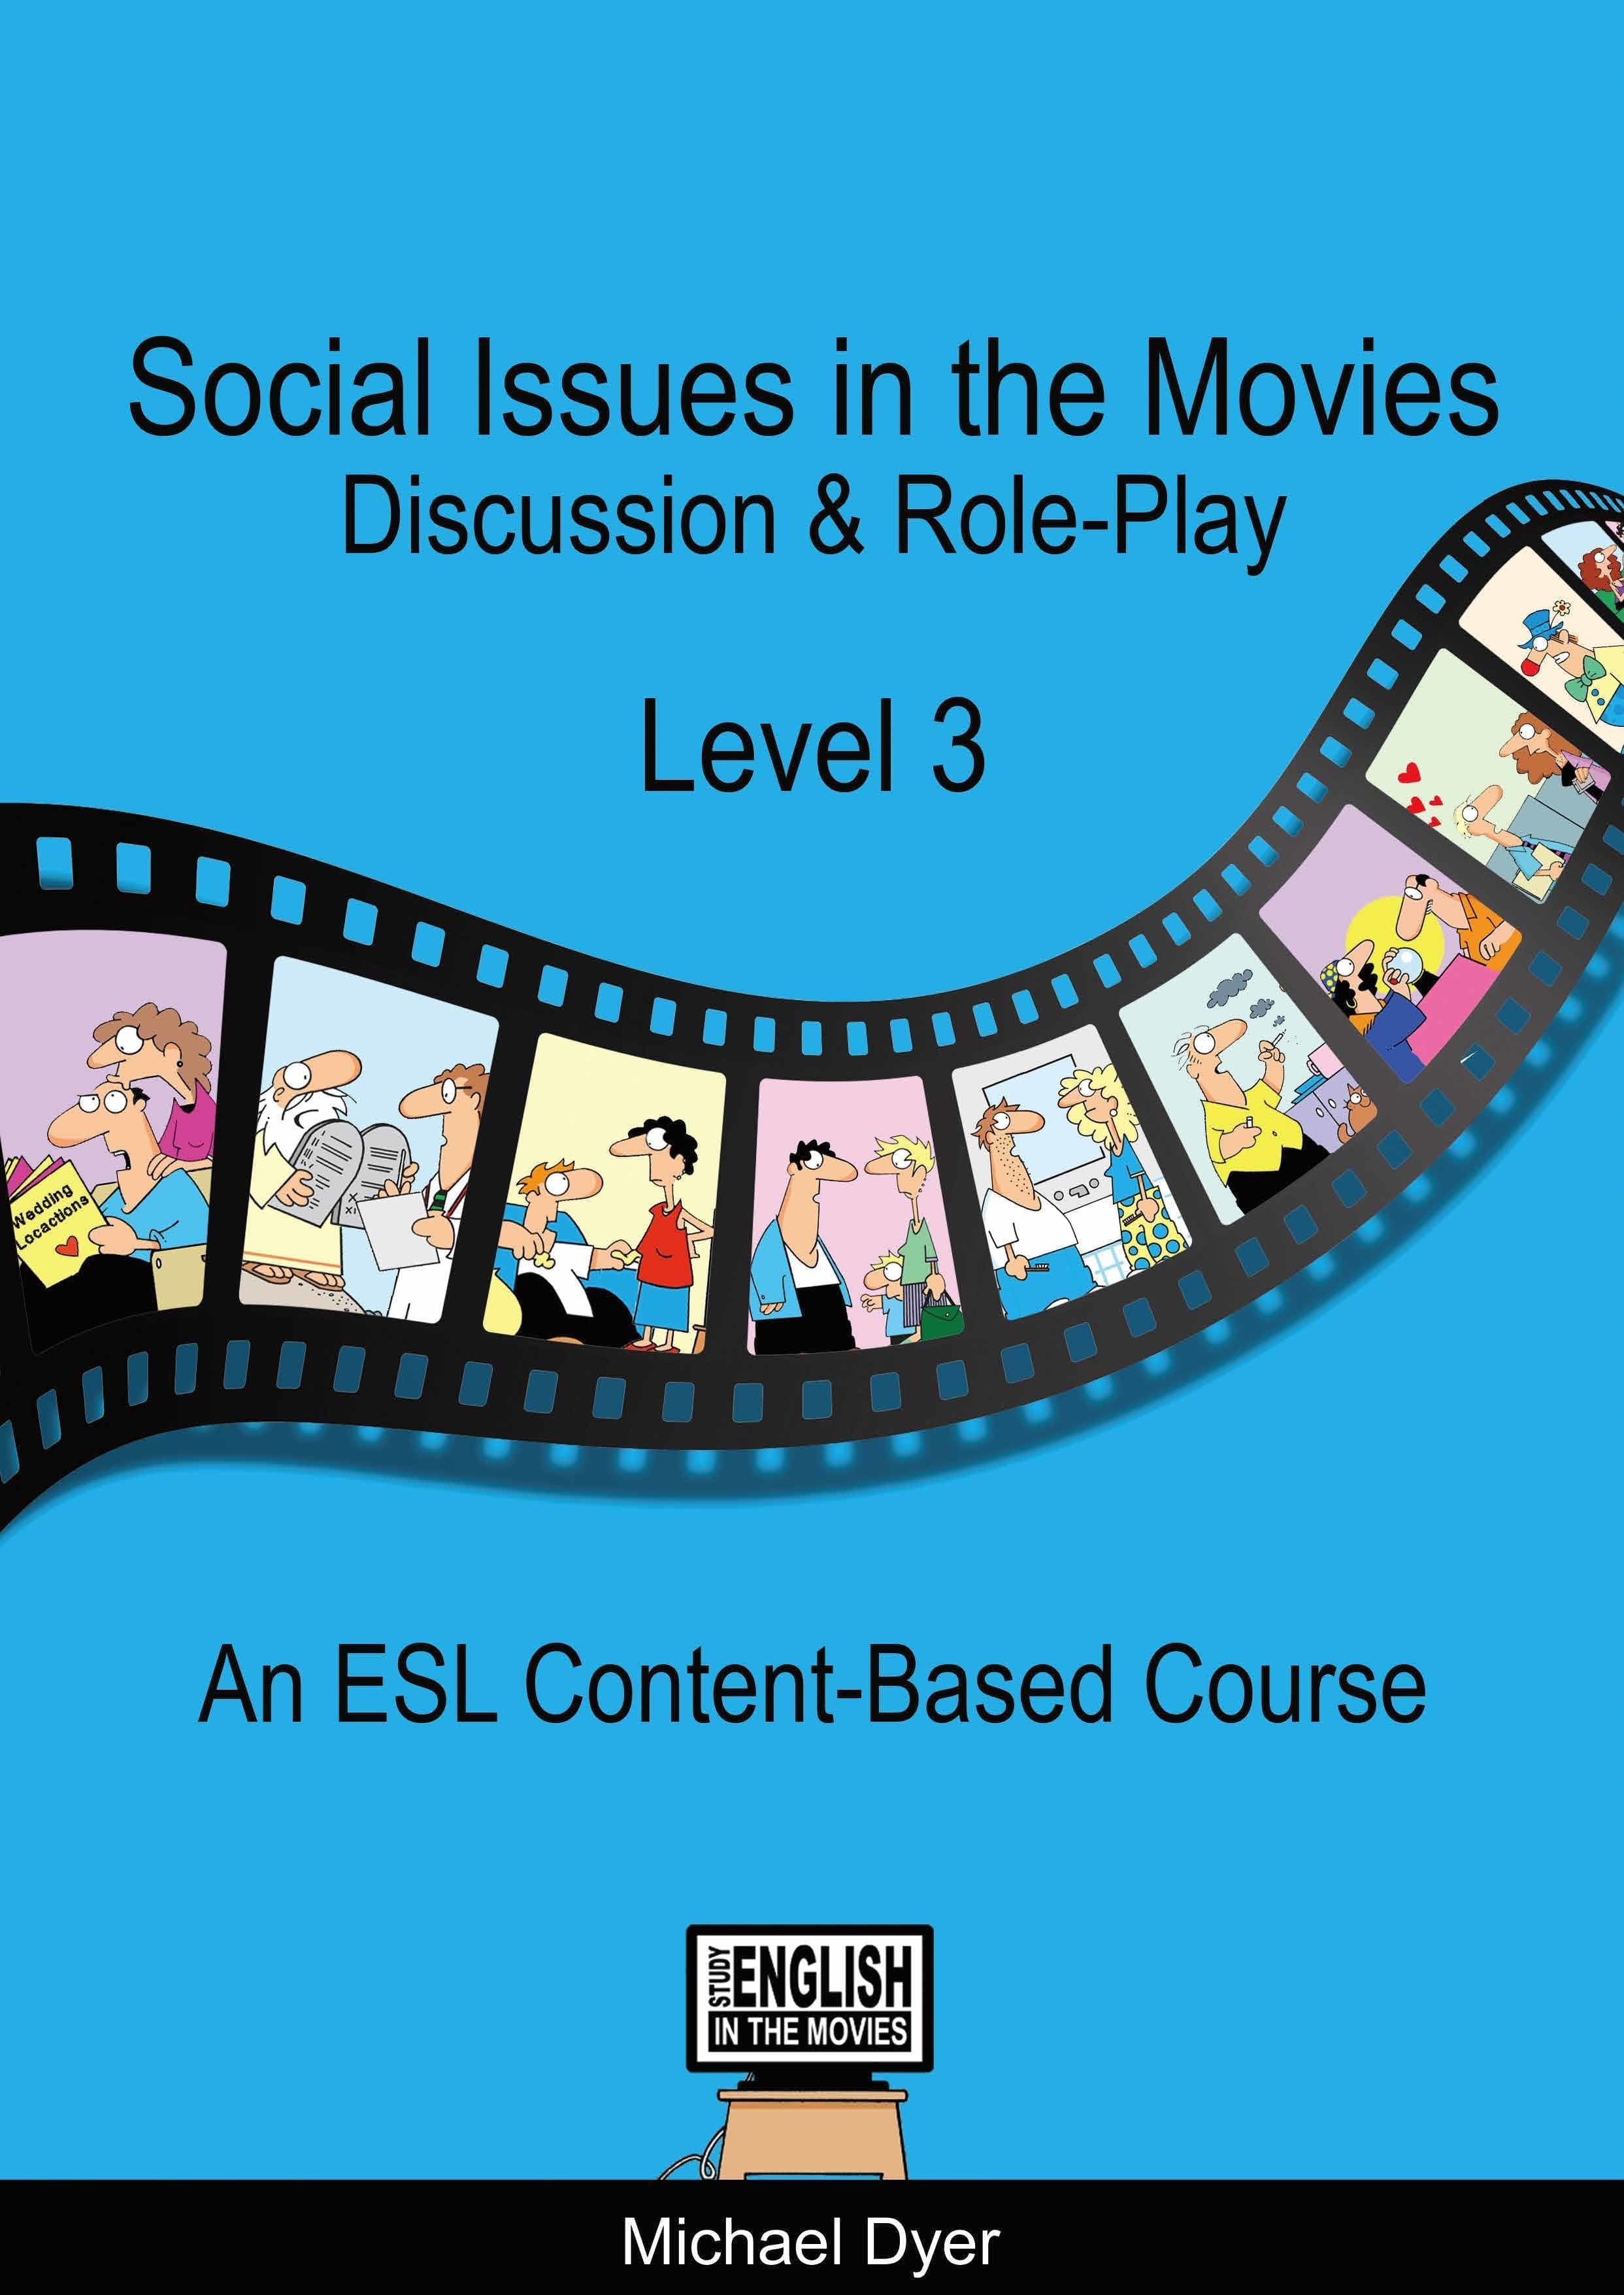 『Social Issues in the Movies Level3』Michael Dyer　著